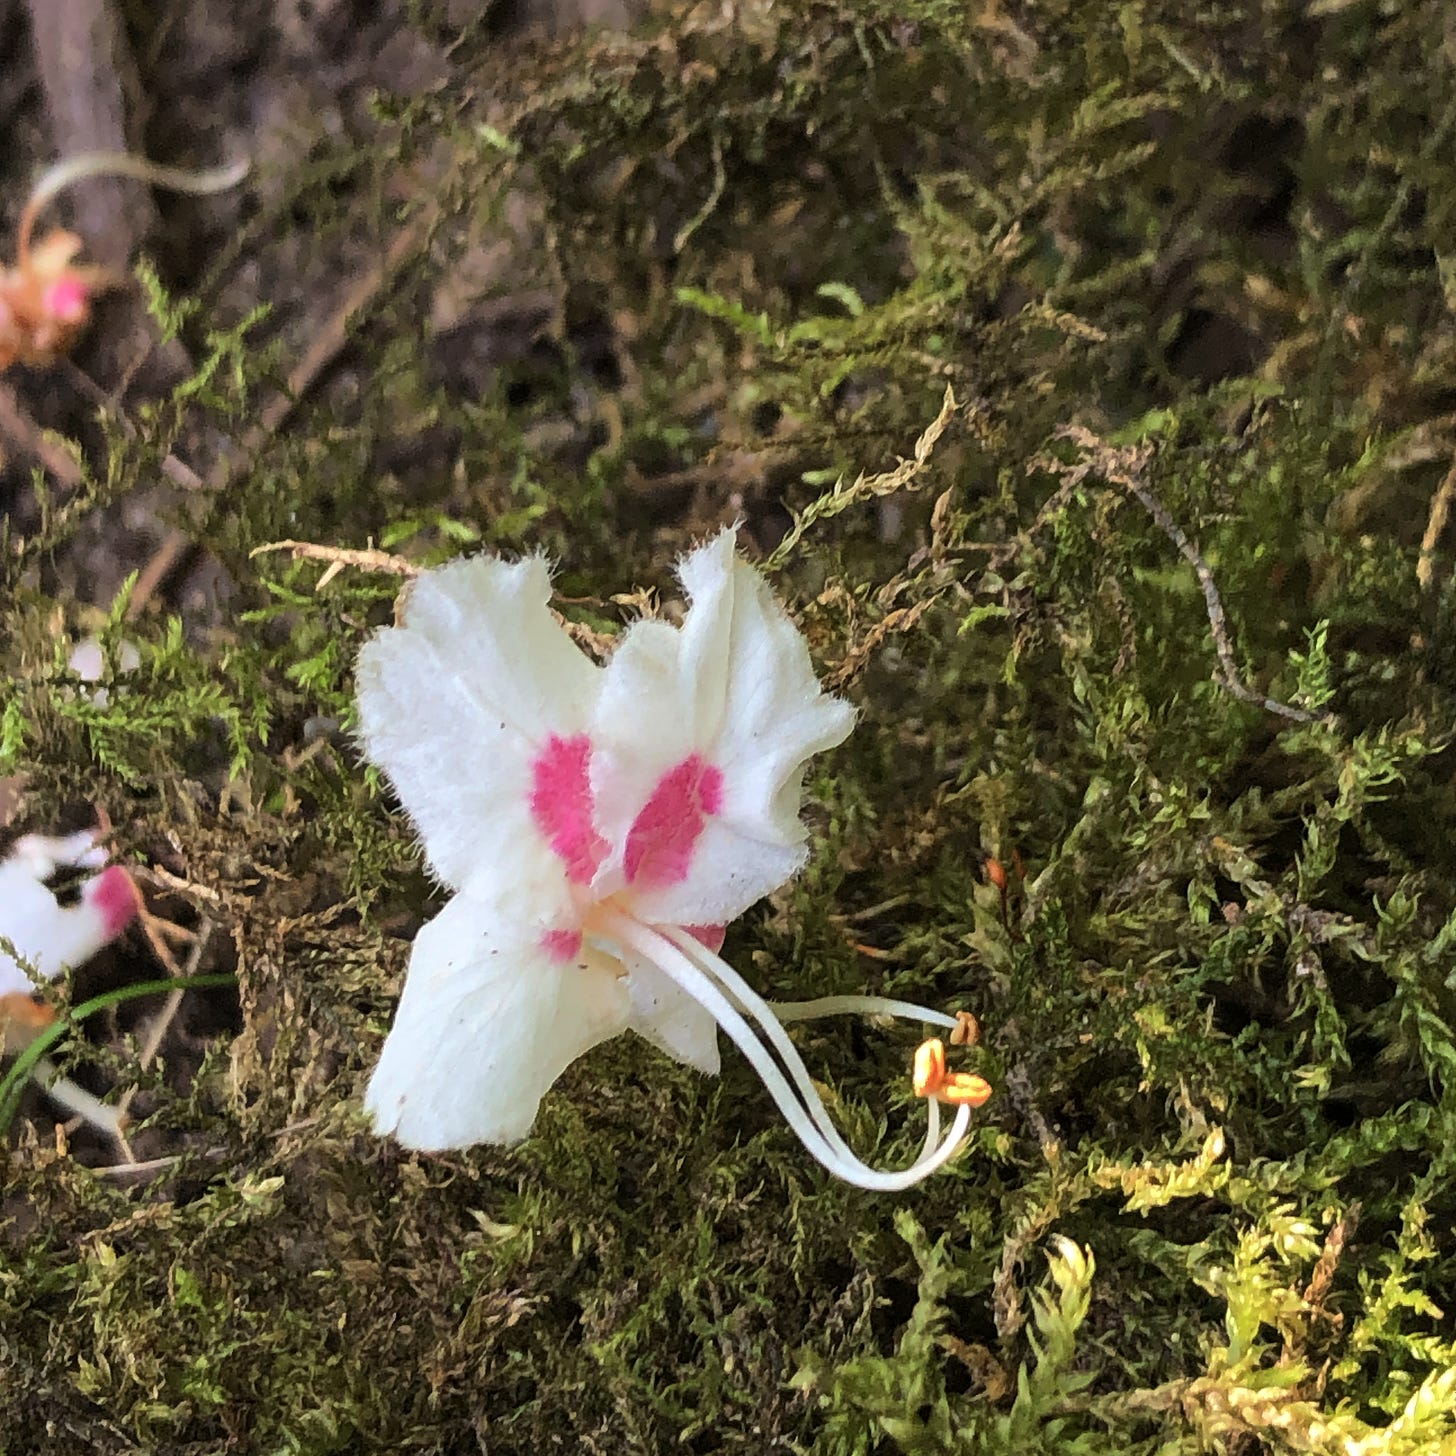 White flower with four finely fringed petals with pink centers, on moss.